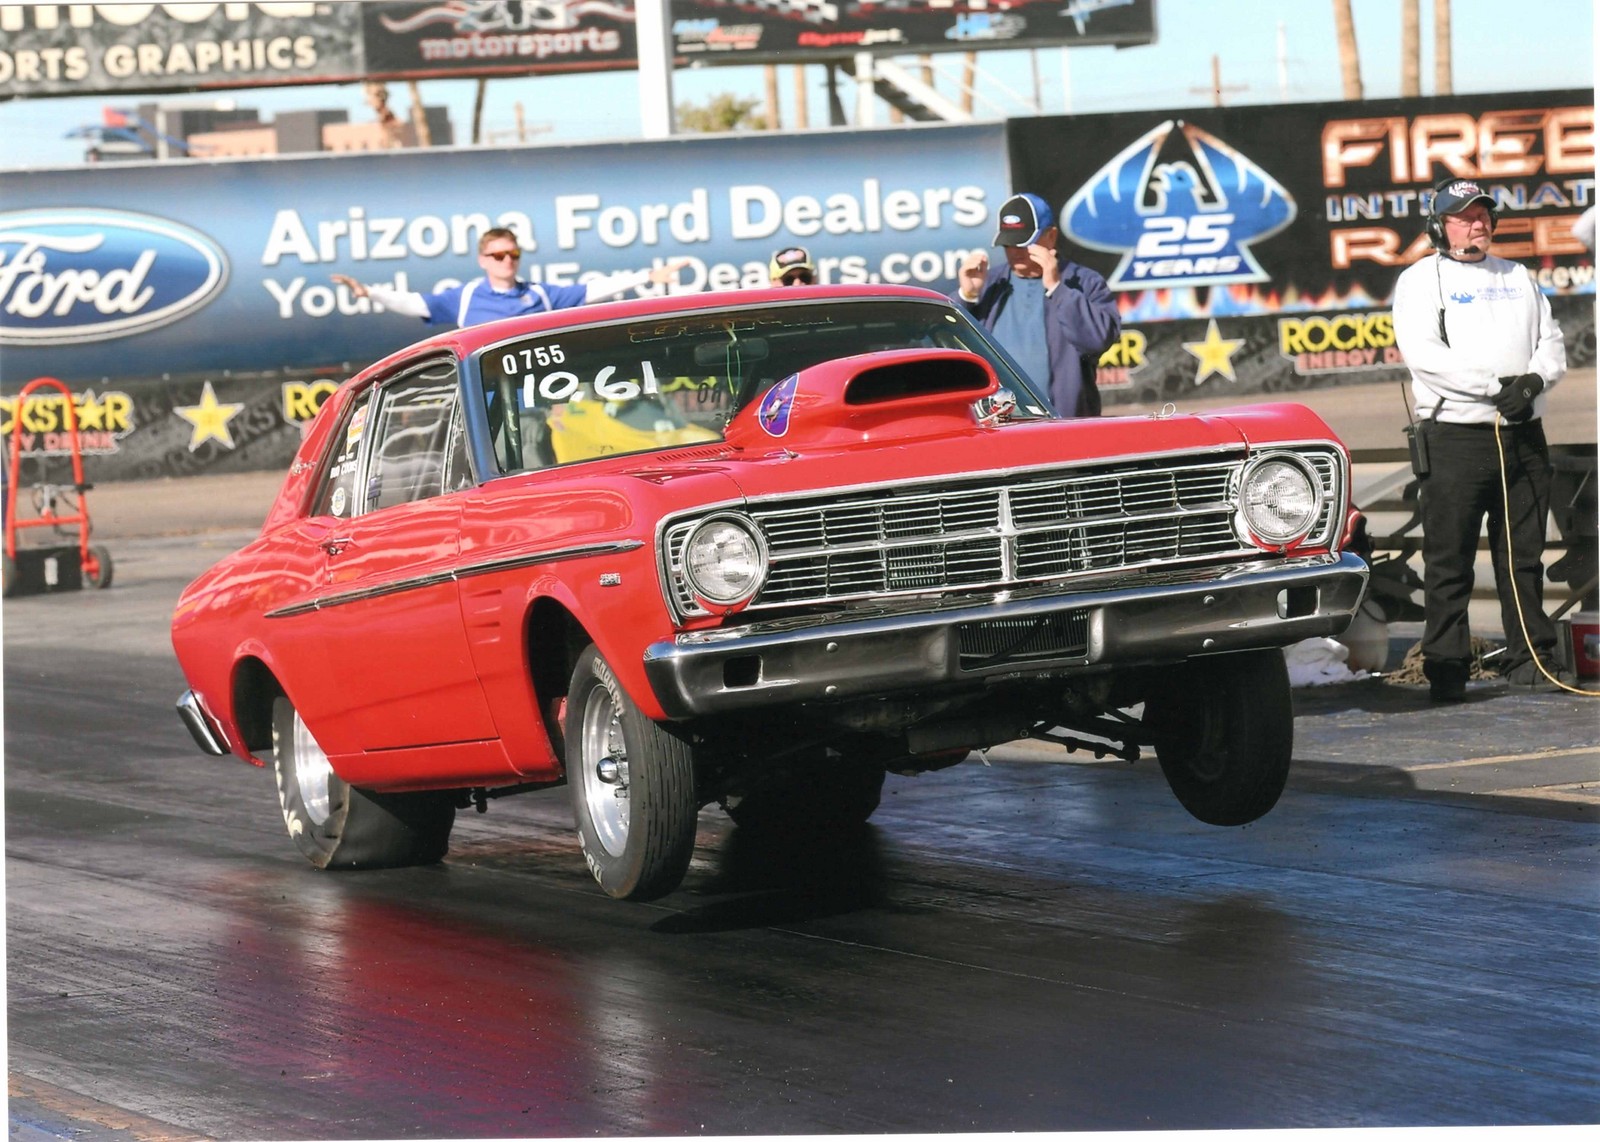 RED 1967 Ford Falcon Sport Coupe